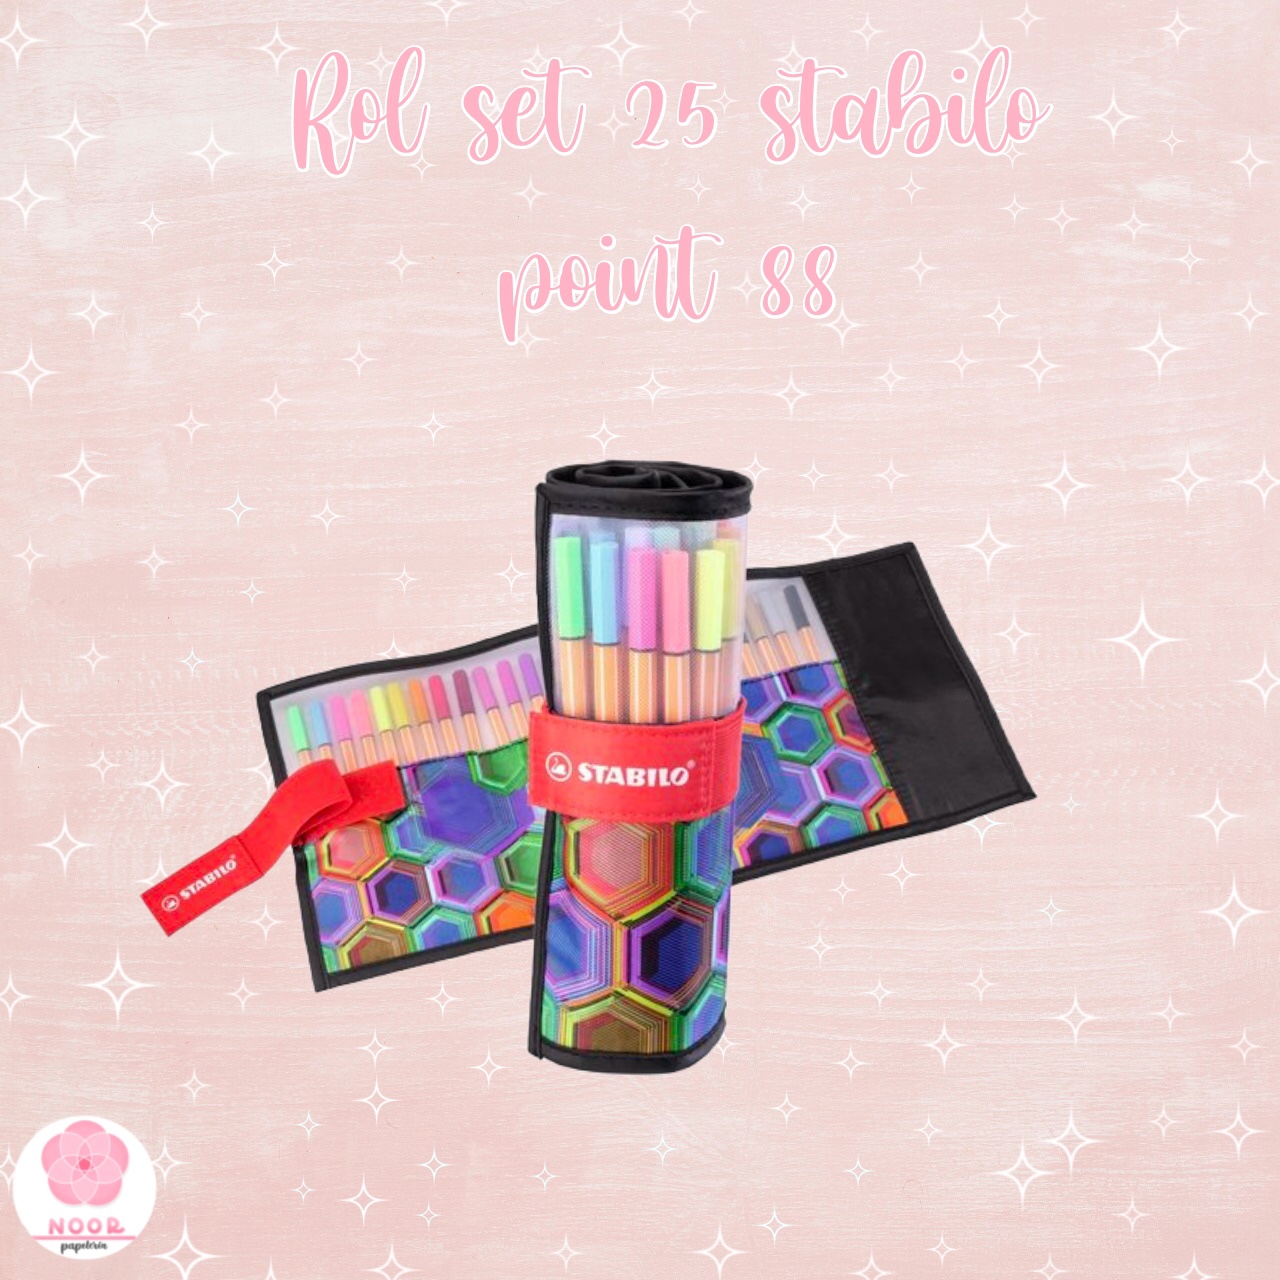 Stabilo Point 88 Rollerset (25 COLORES)